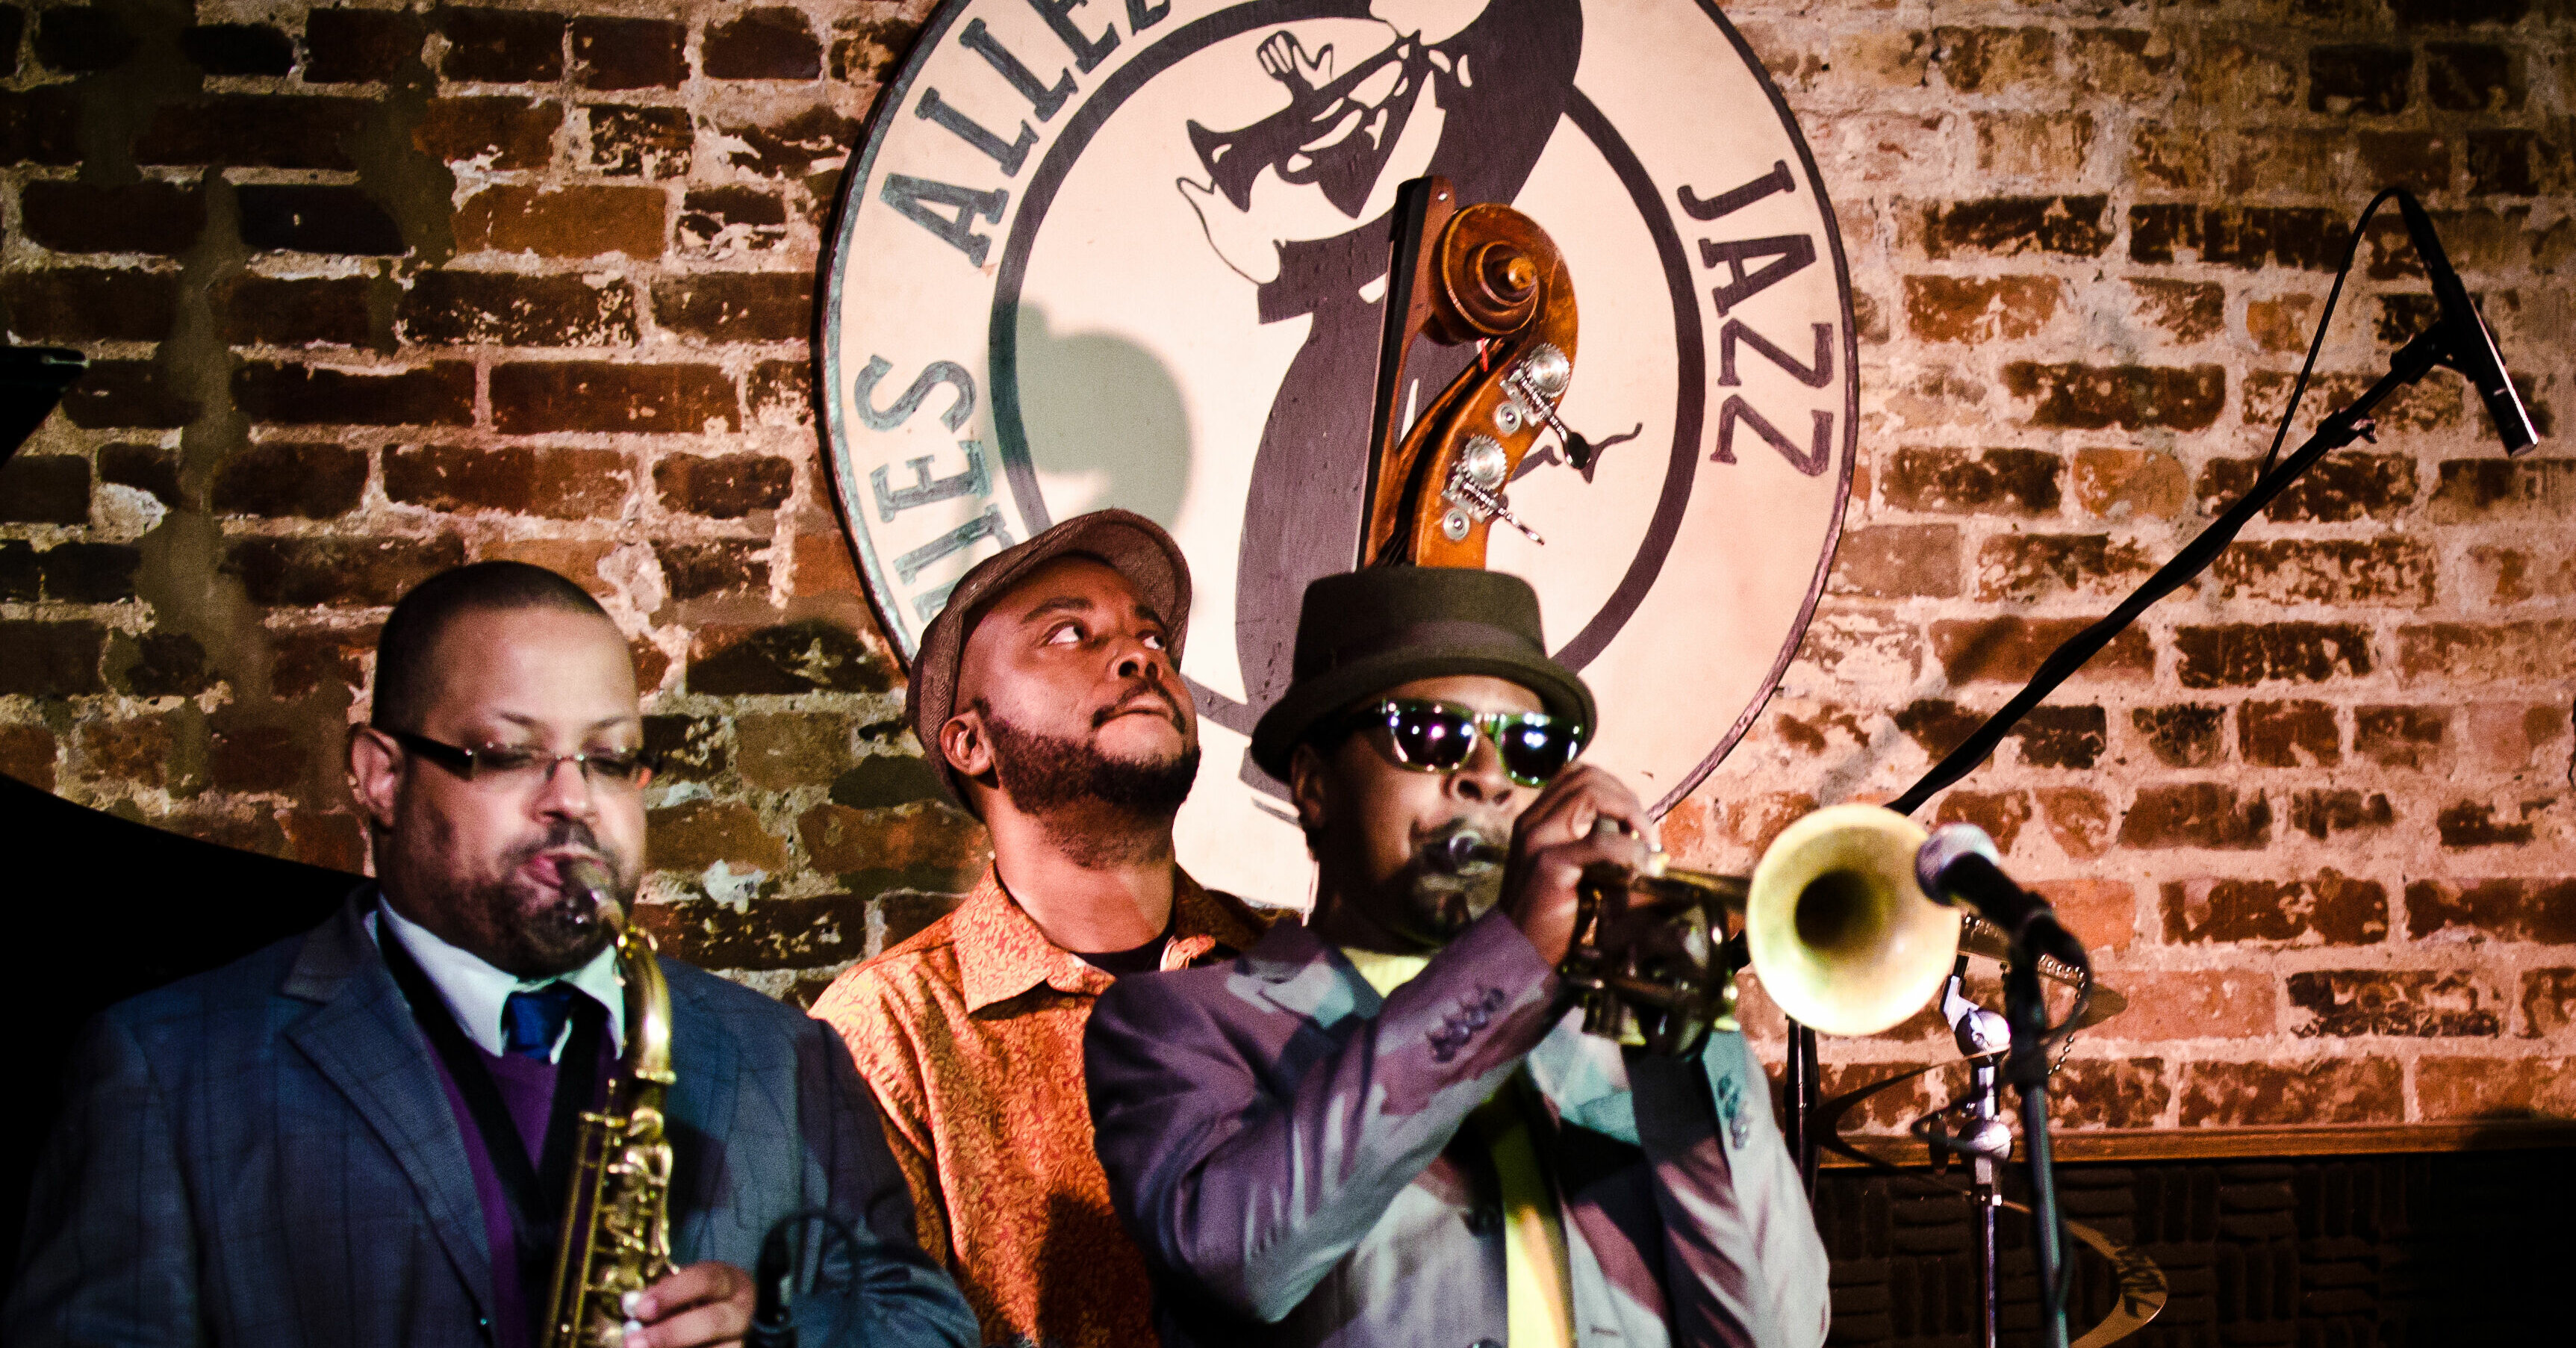 music treasure Blues Alley barely holding on during pandemic